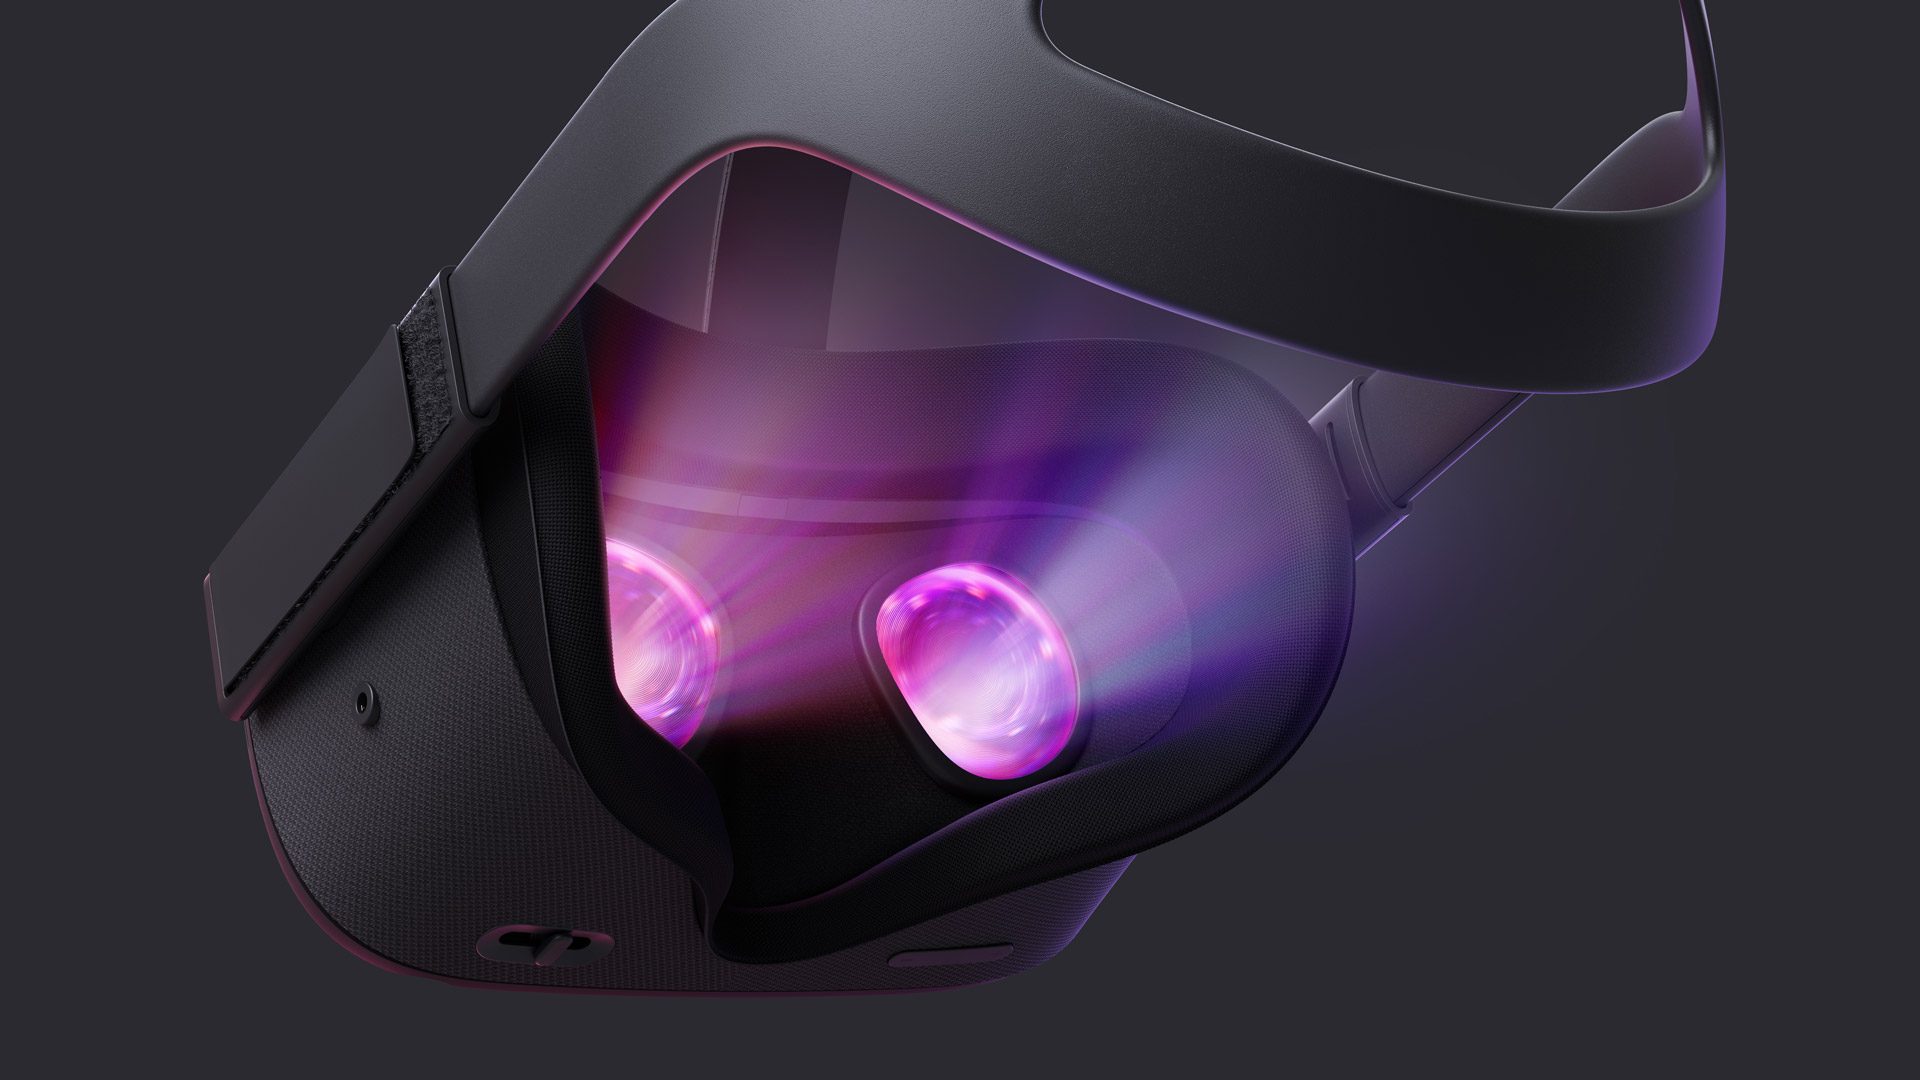 Roblox CEO Interested In Possible Oculus Quest Launch - VRScout